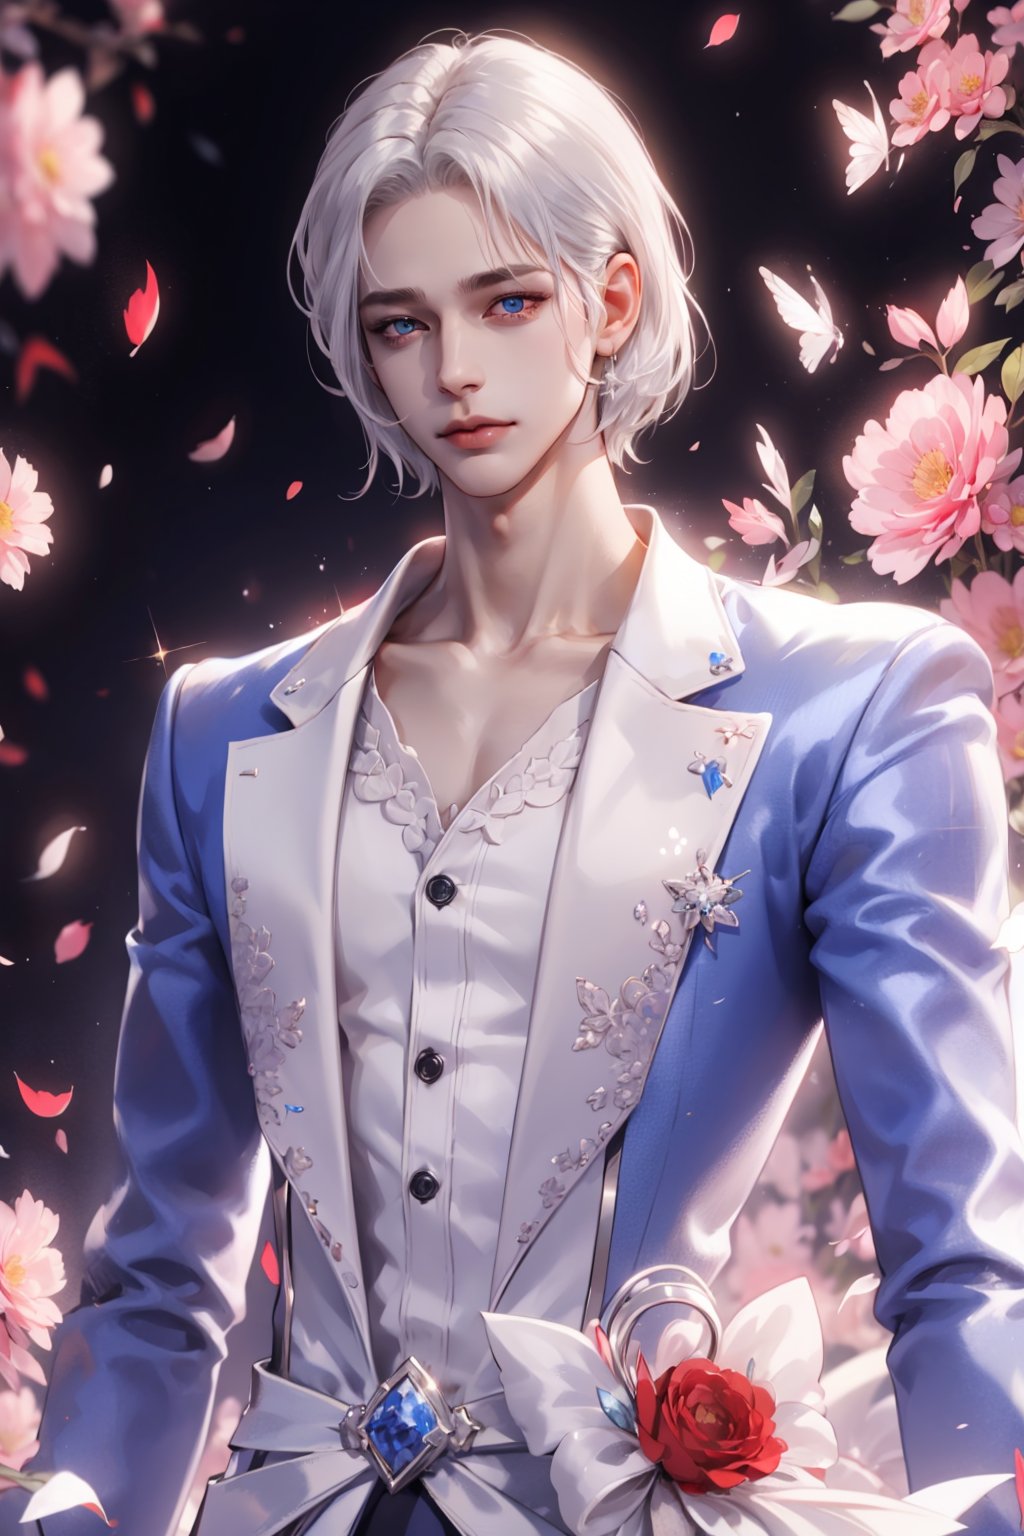 (asterpiece:1.2, best quality), (Soft light), (shiny skin), 1person, manly, handsome, short_silver_hair, short_silver_hair_man, suits, party, ballroom, ballgown, eye_lashes, collarbone, victorian, blue eyes, , flowers petals,weiboZH,hll, red background